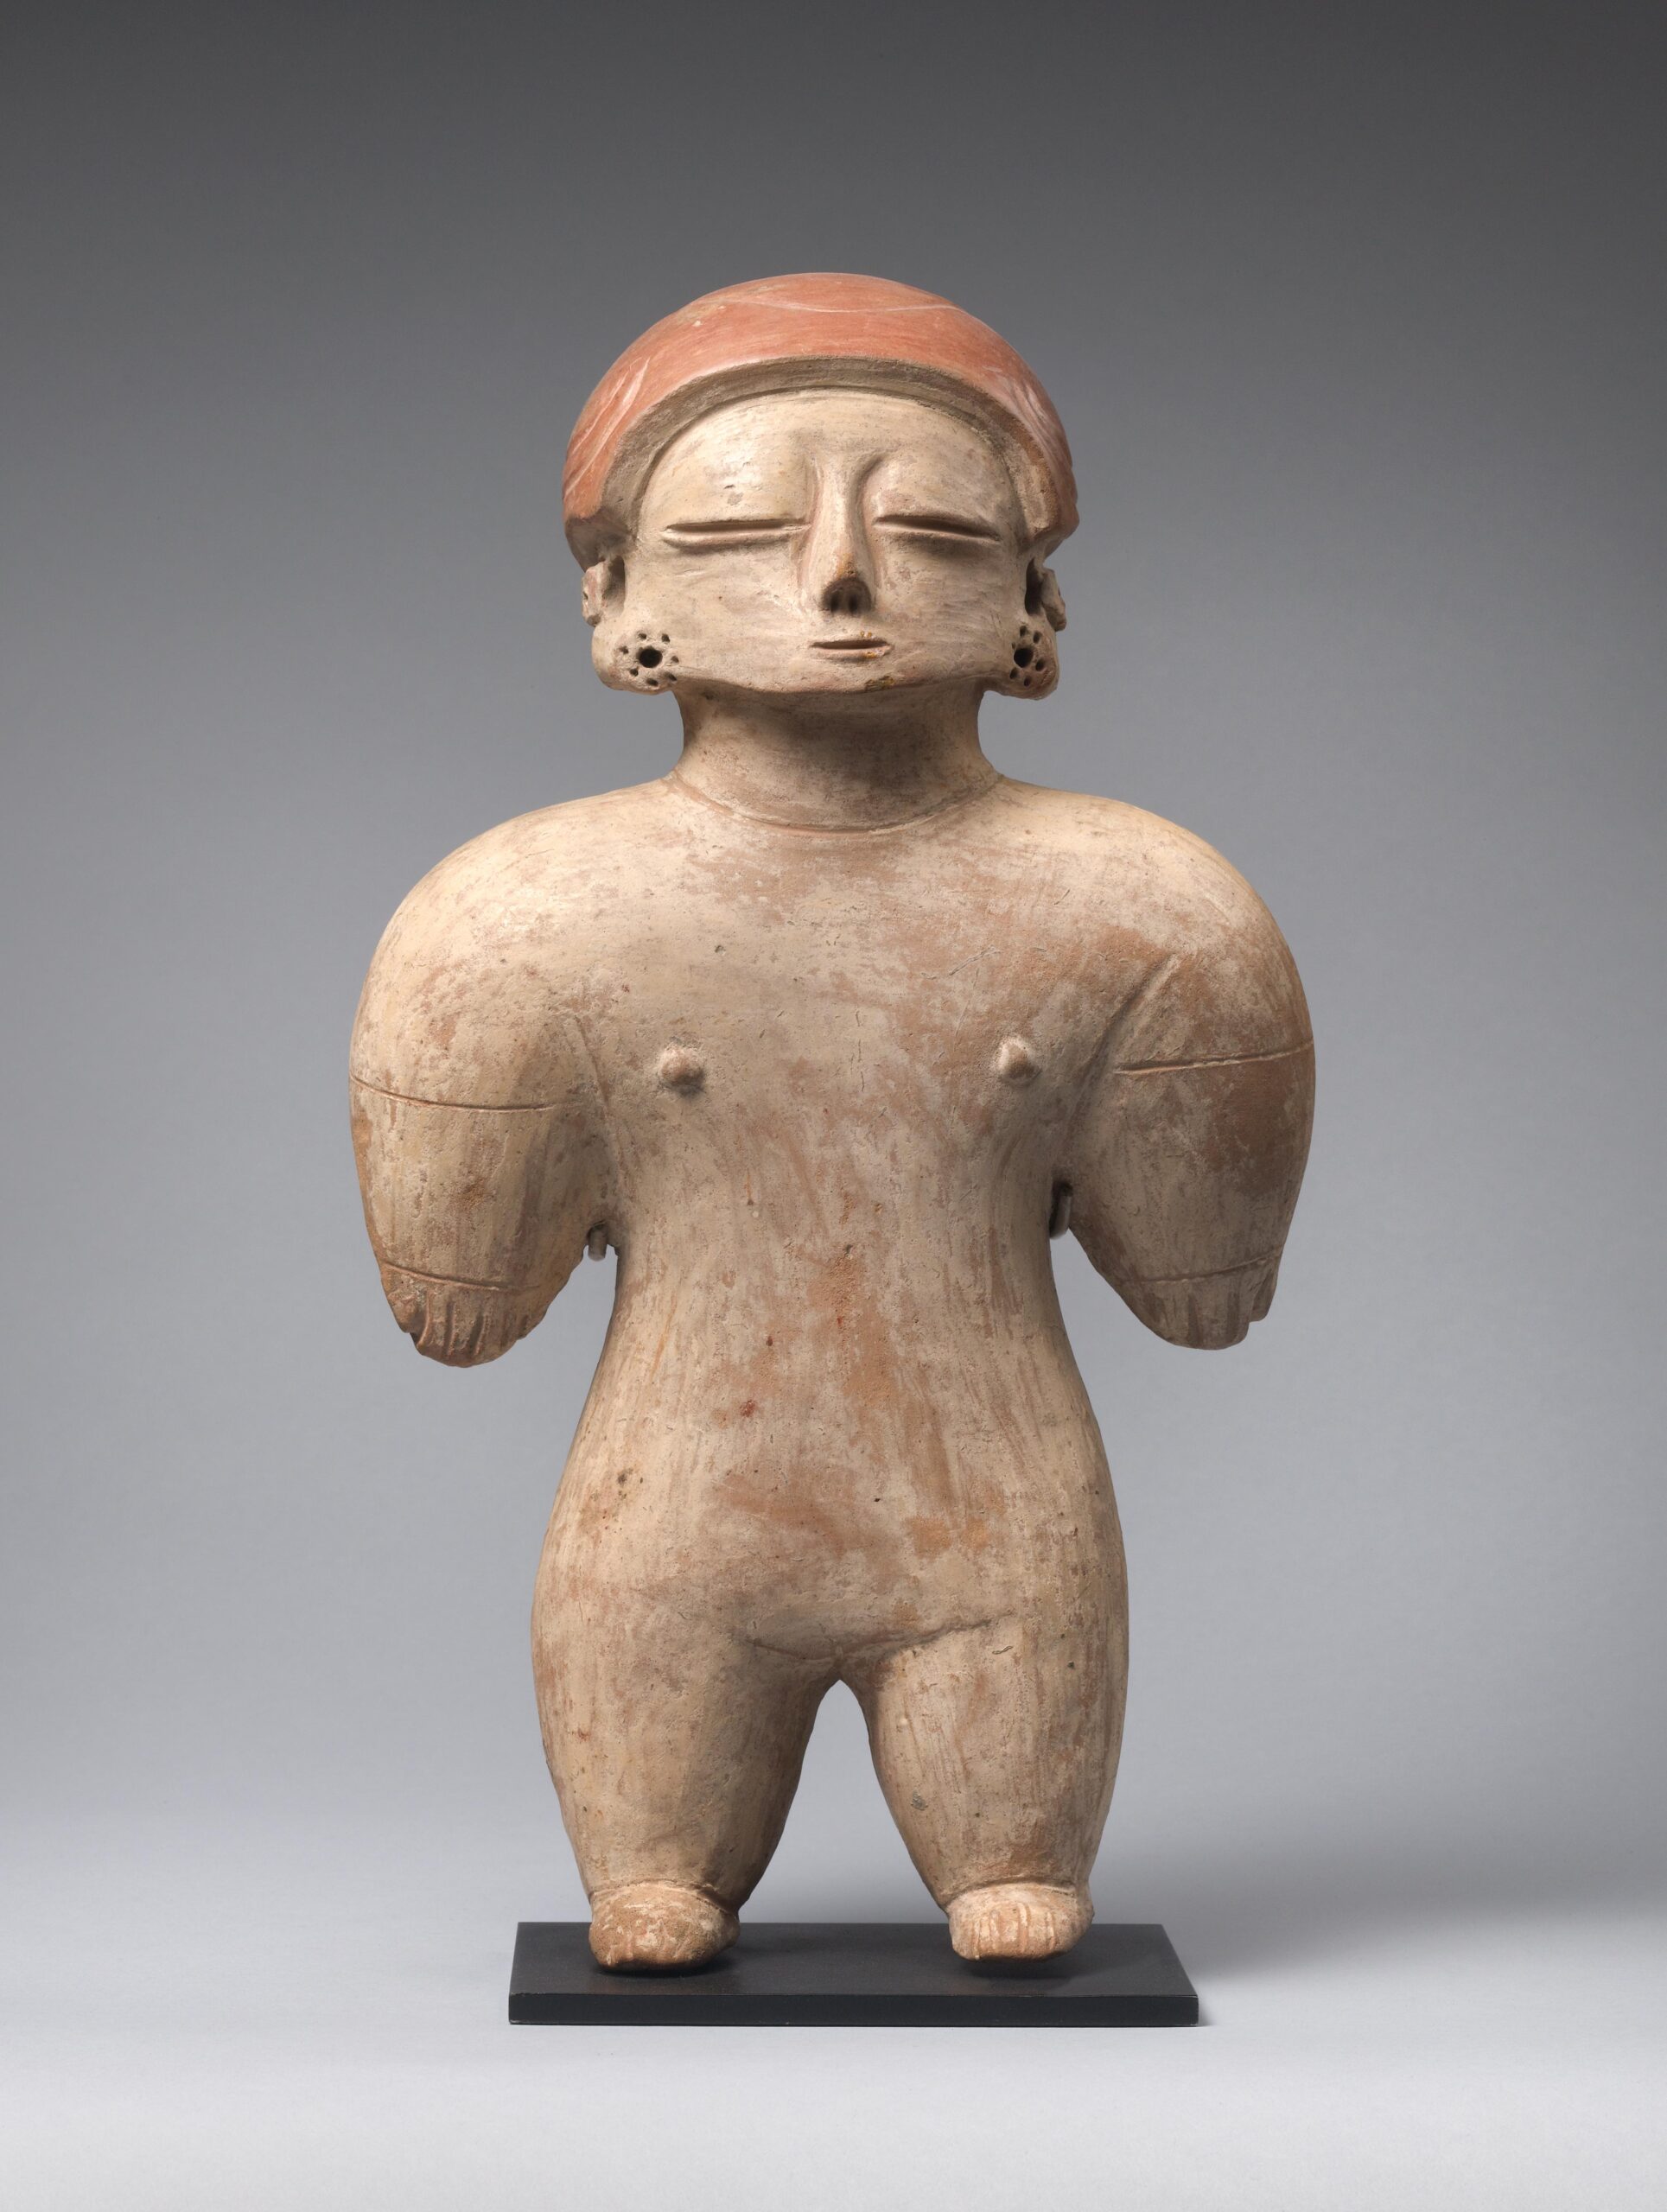 Stylized ceramic standing female figure with short round shoulders and legs, a headress, and ear spools.